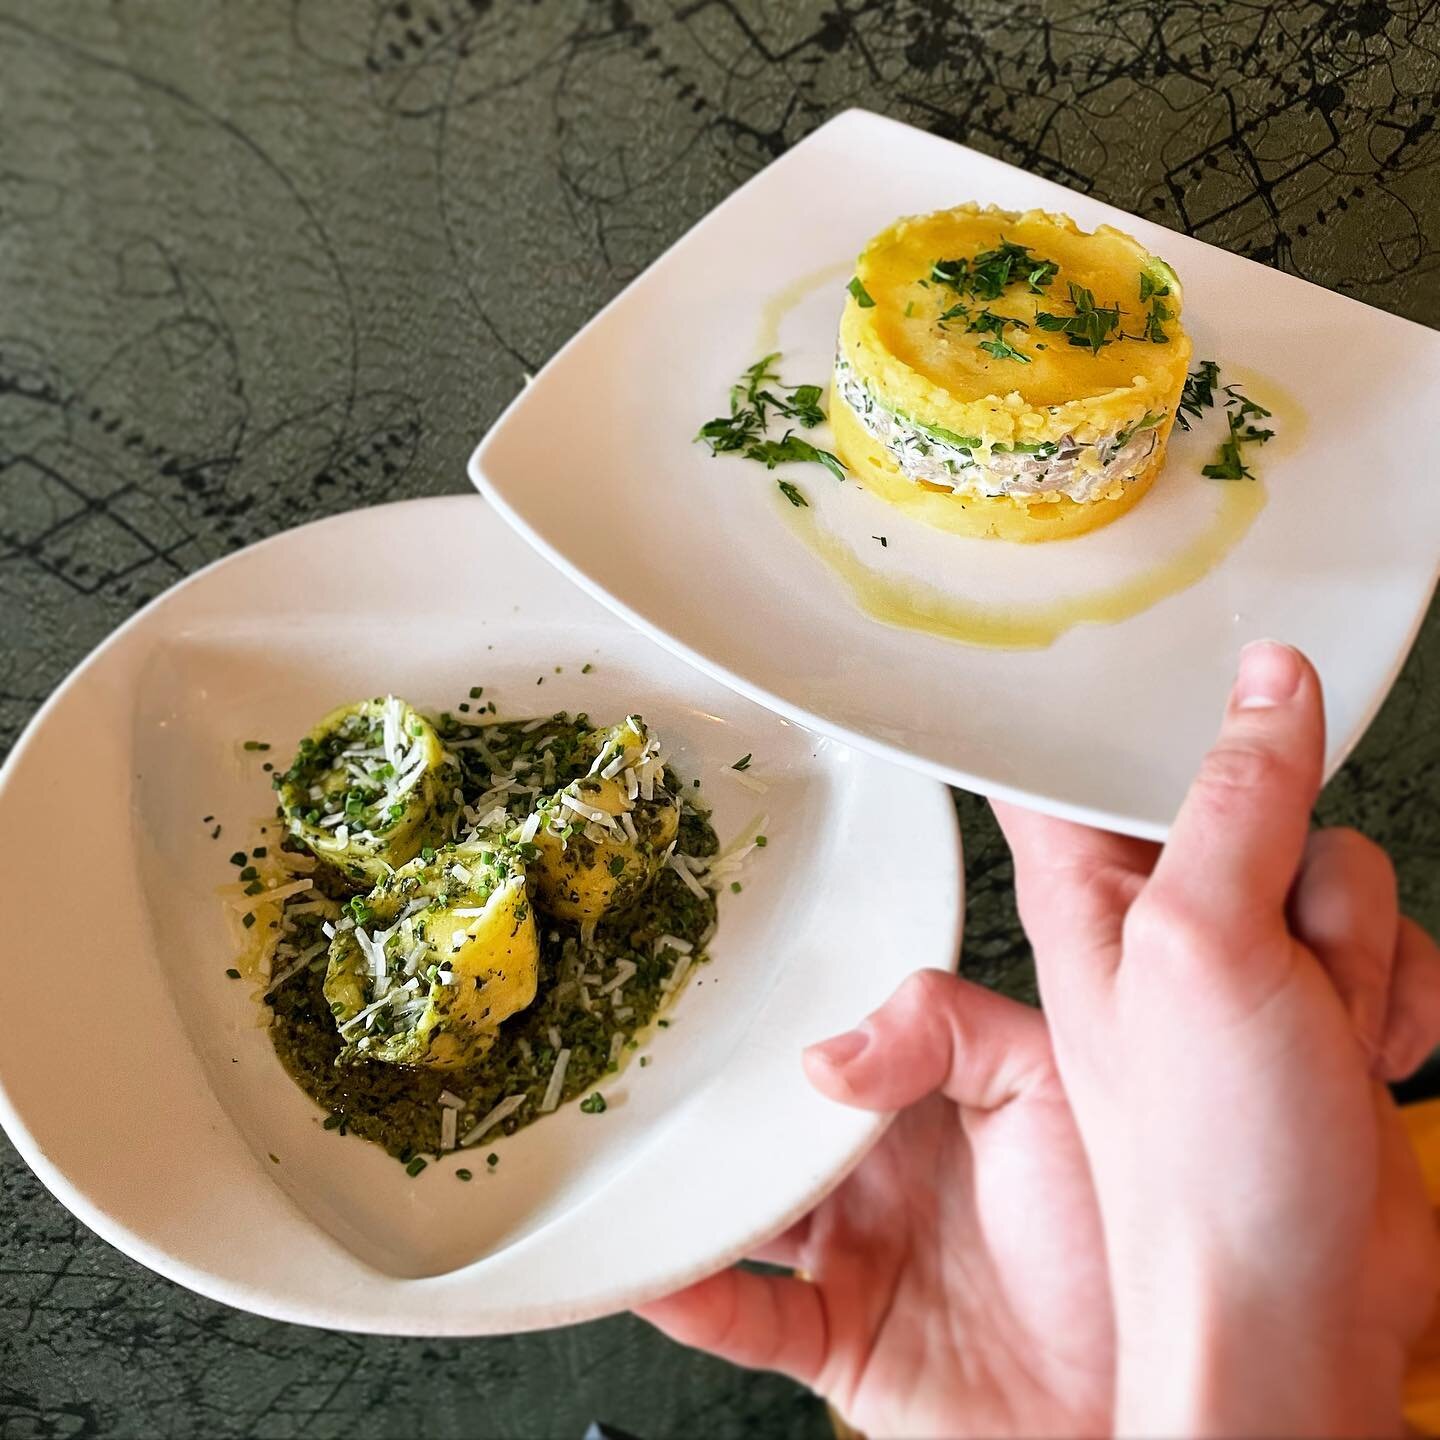 The colors of spring are already popping on the menu! Pestos, peppers, potatoes&hellip;oh my! Come see some of our fresh, inspired small plates 🍽️

#denver #denverdining #diningoutdenver #denverfoodie #cityparkdenver #foodporn